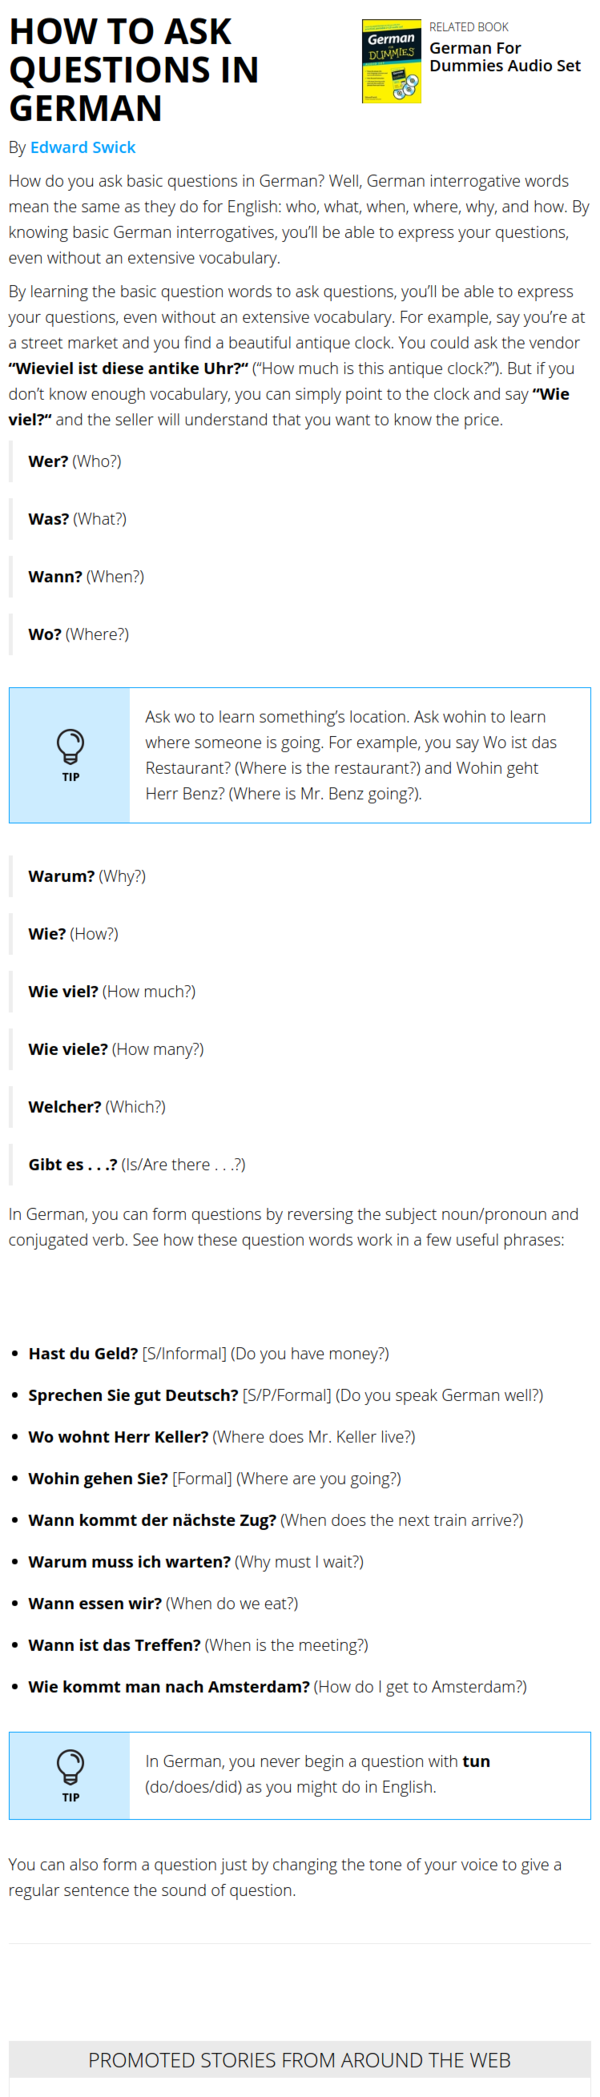 ./20161031-1451-cet-how-to-ask-questions-in-german-8.png